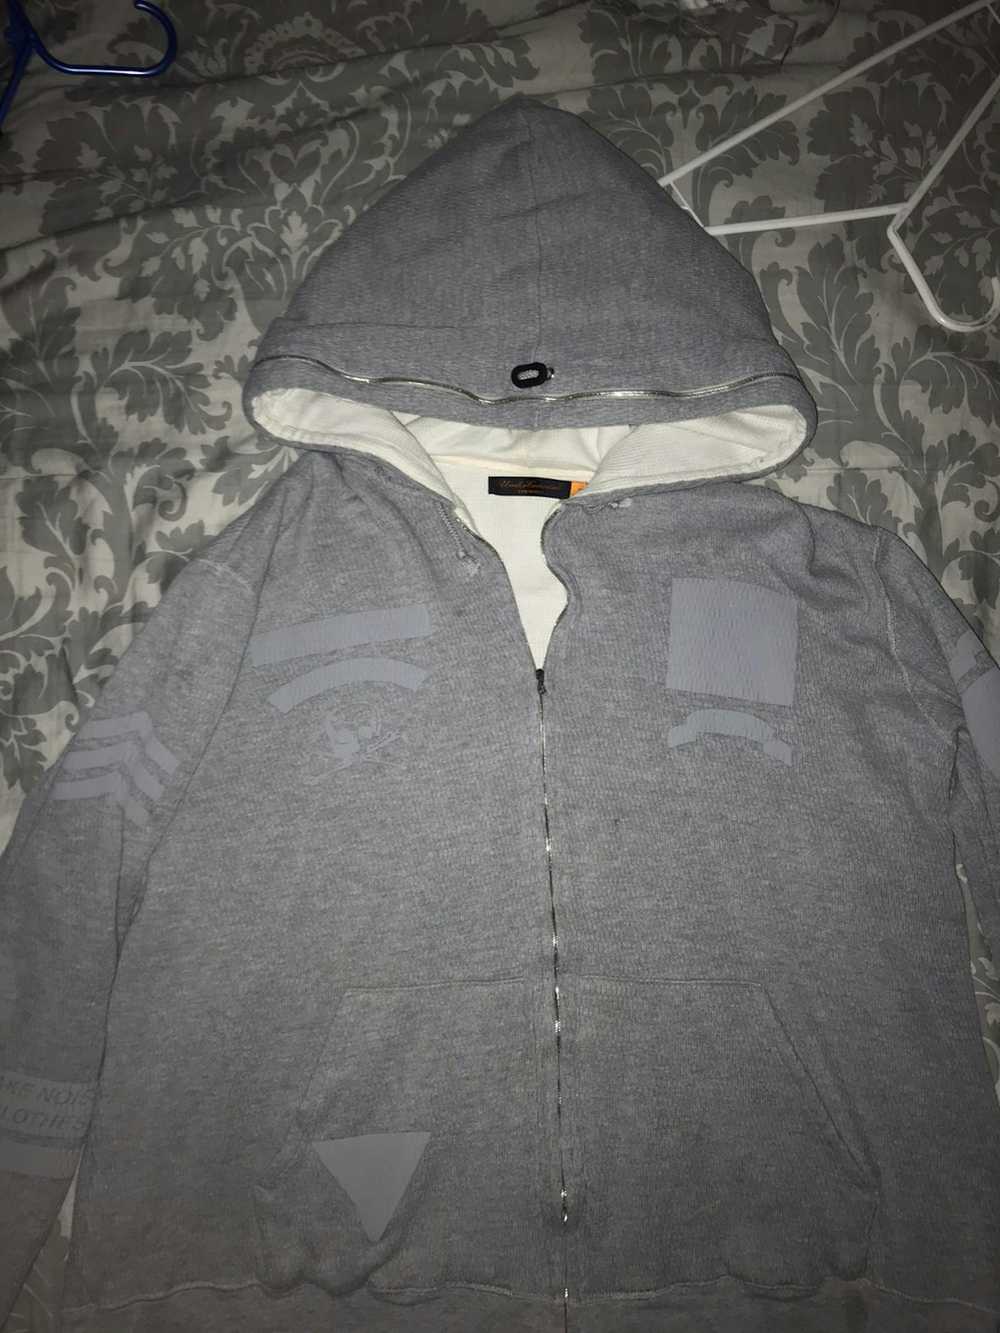 Undercover undercover hoodie - image 4